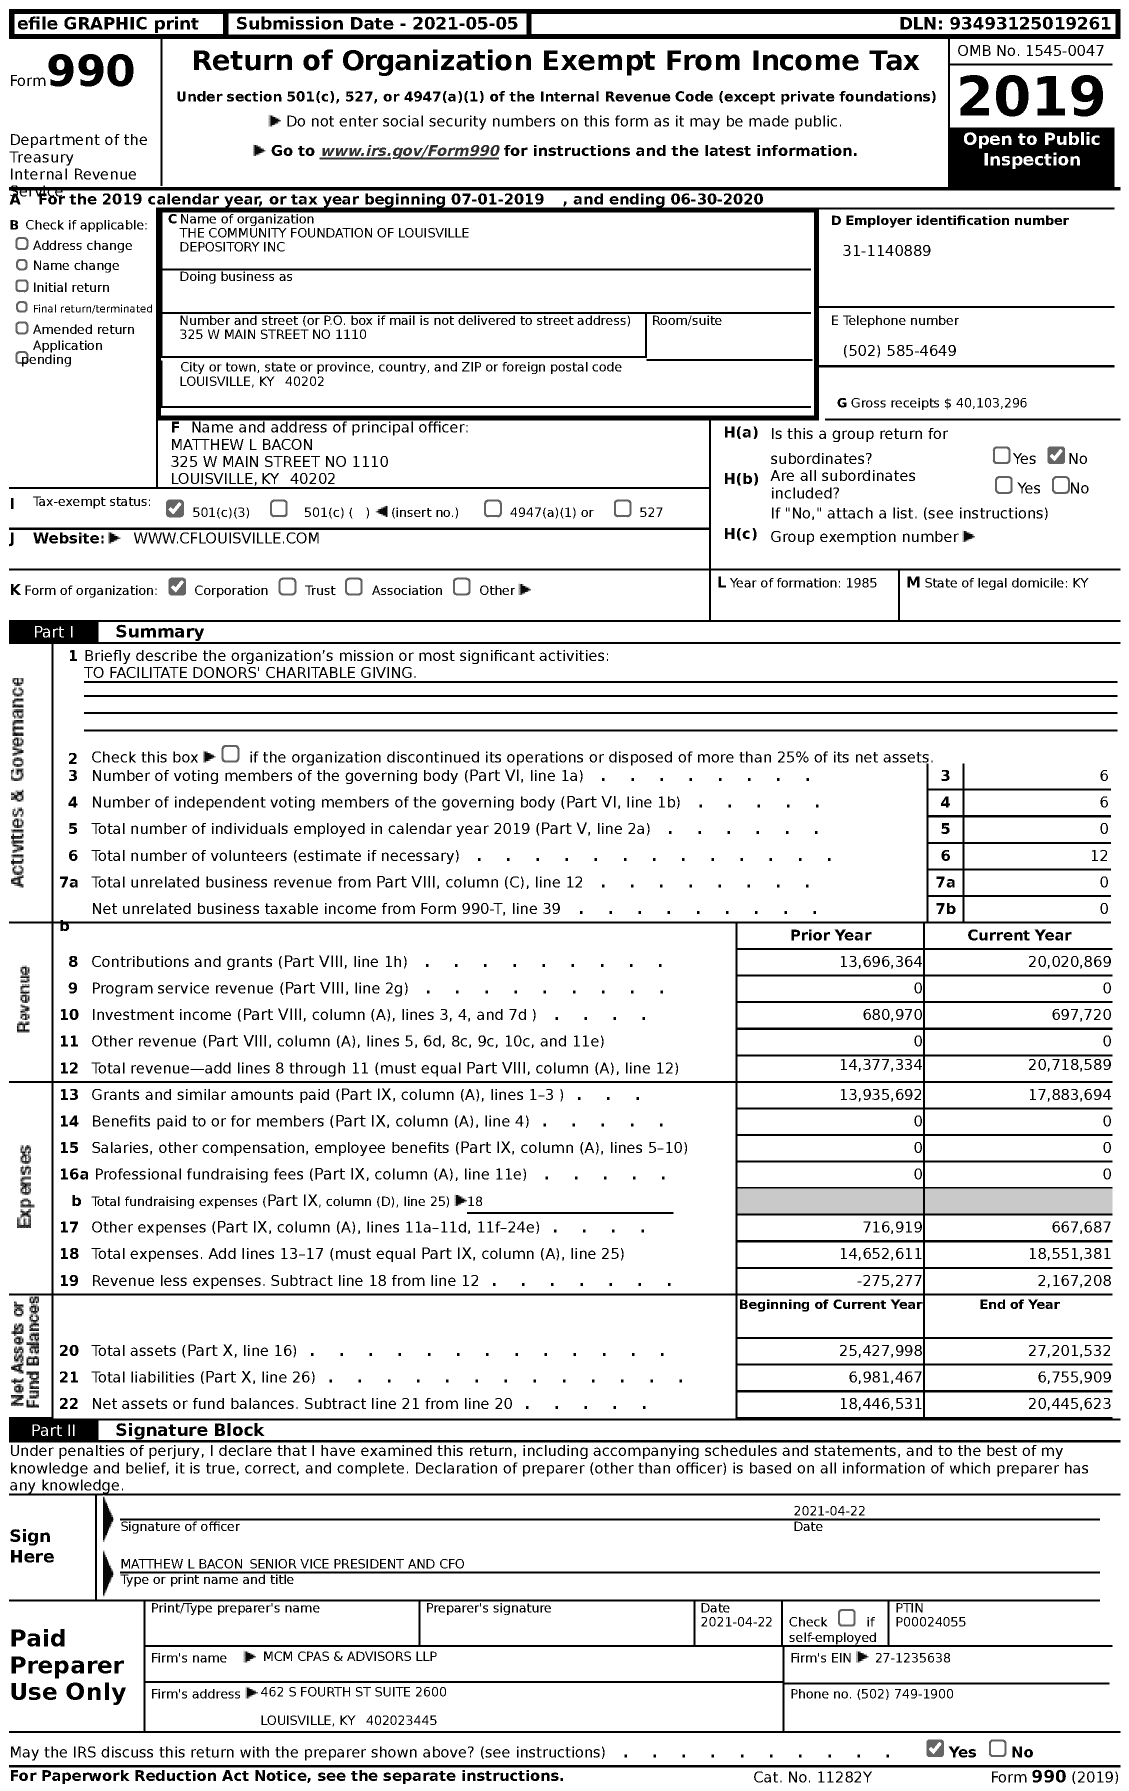 Image of first page of 2019 Form 990 for The Community Foundation of Louisville Depository